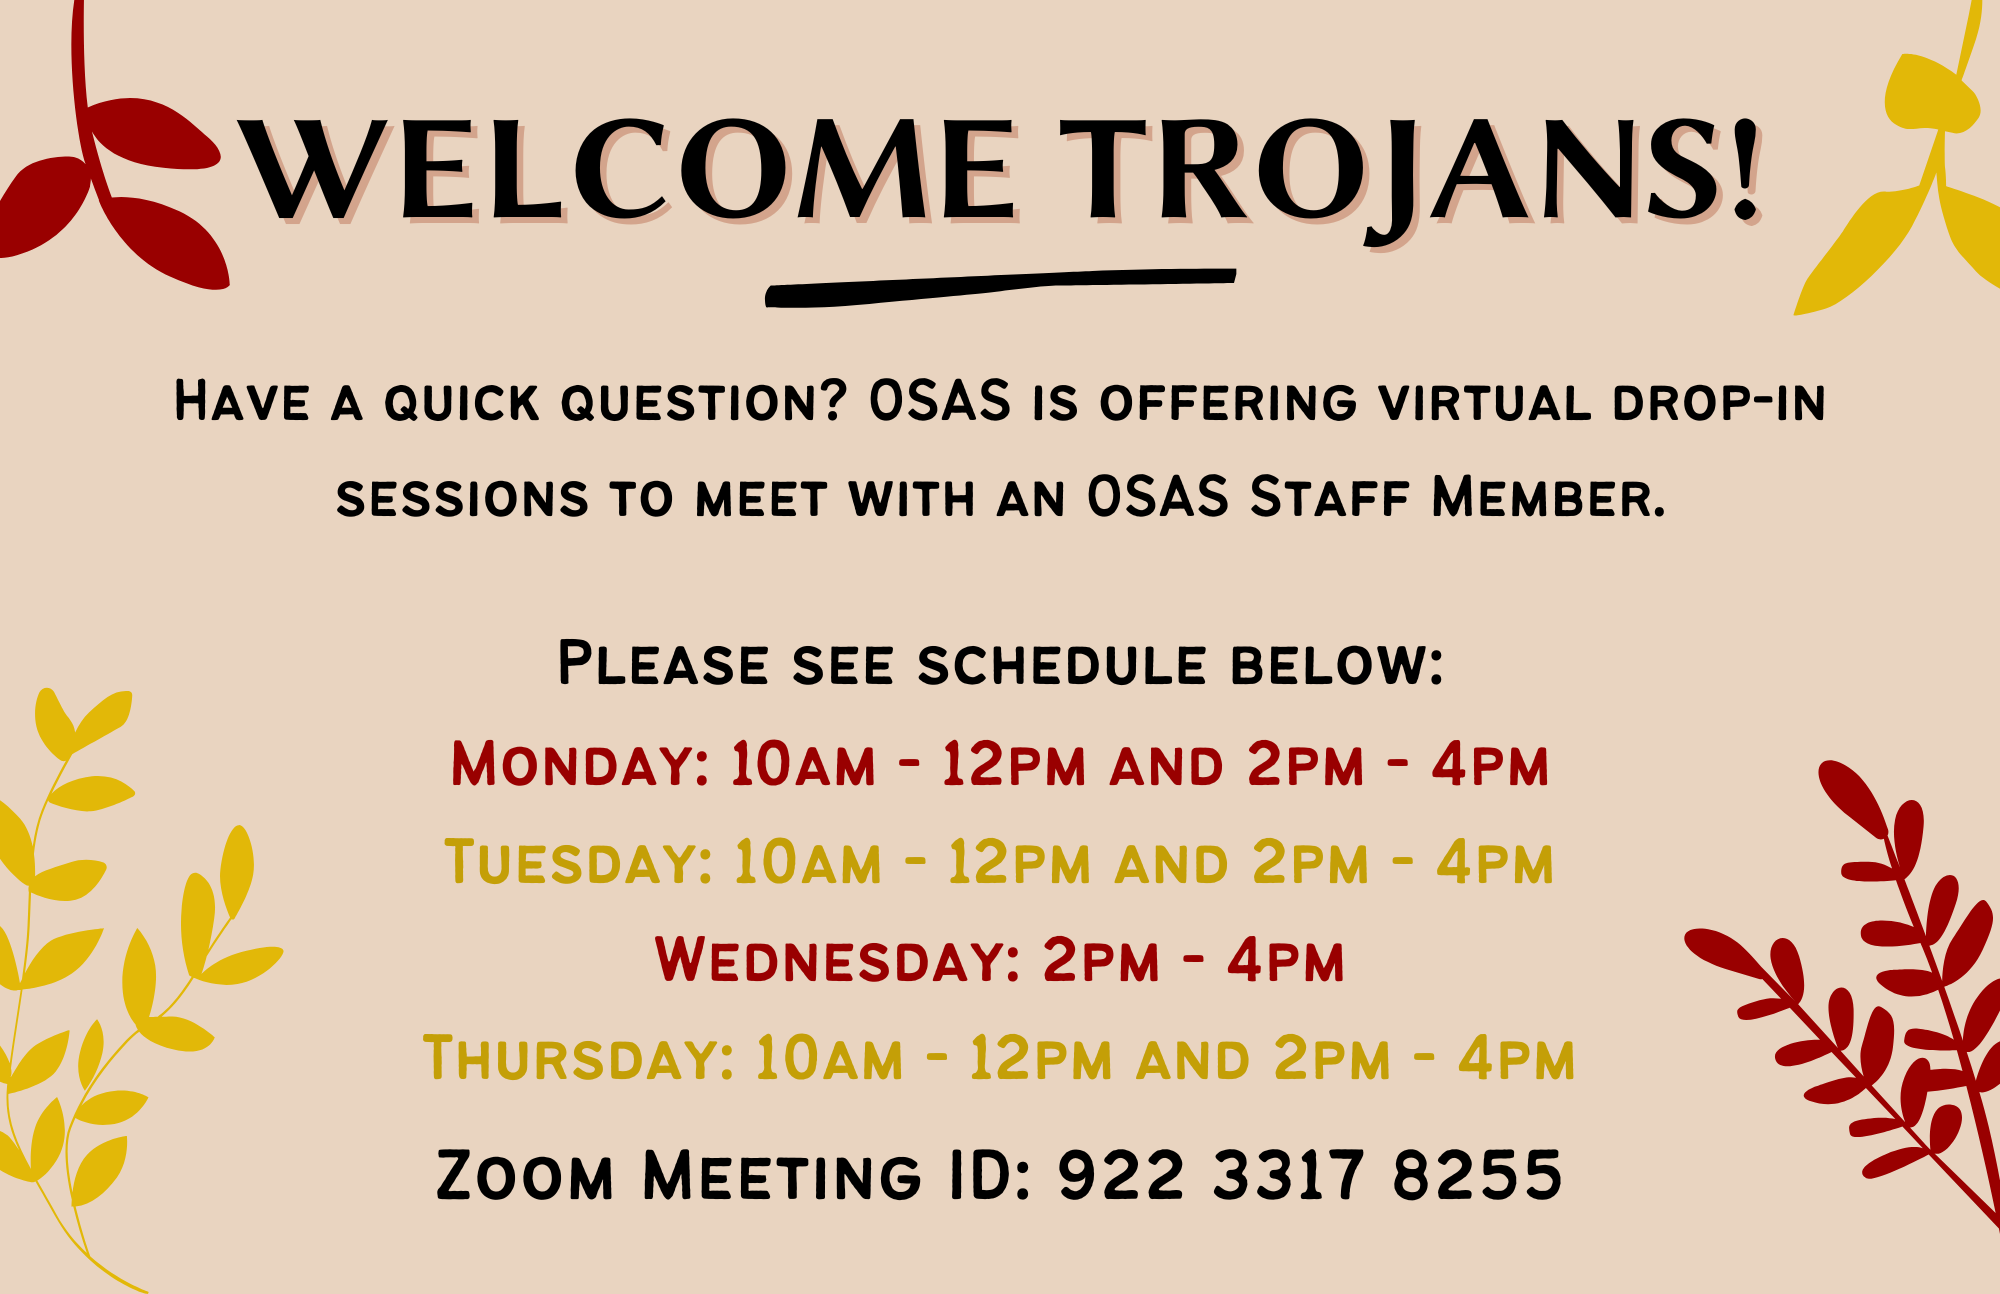 OSAS Virtual Drop-In Schedule Below Monday: 10am - 12pm and 2pm - 4pm Tuesday: 10am - 12pm and 2pm - 4pm Wednesday: 2pm - 4pm Thursday: 10am - 12pm and 2pm - 4pm Zoom Meeting ID: 922 3317 8255